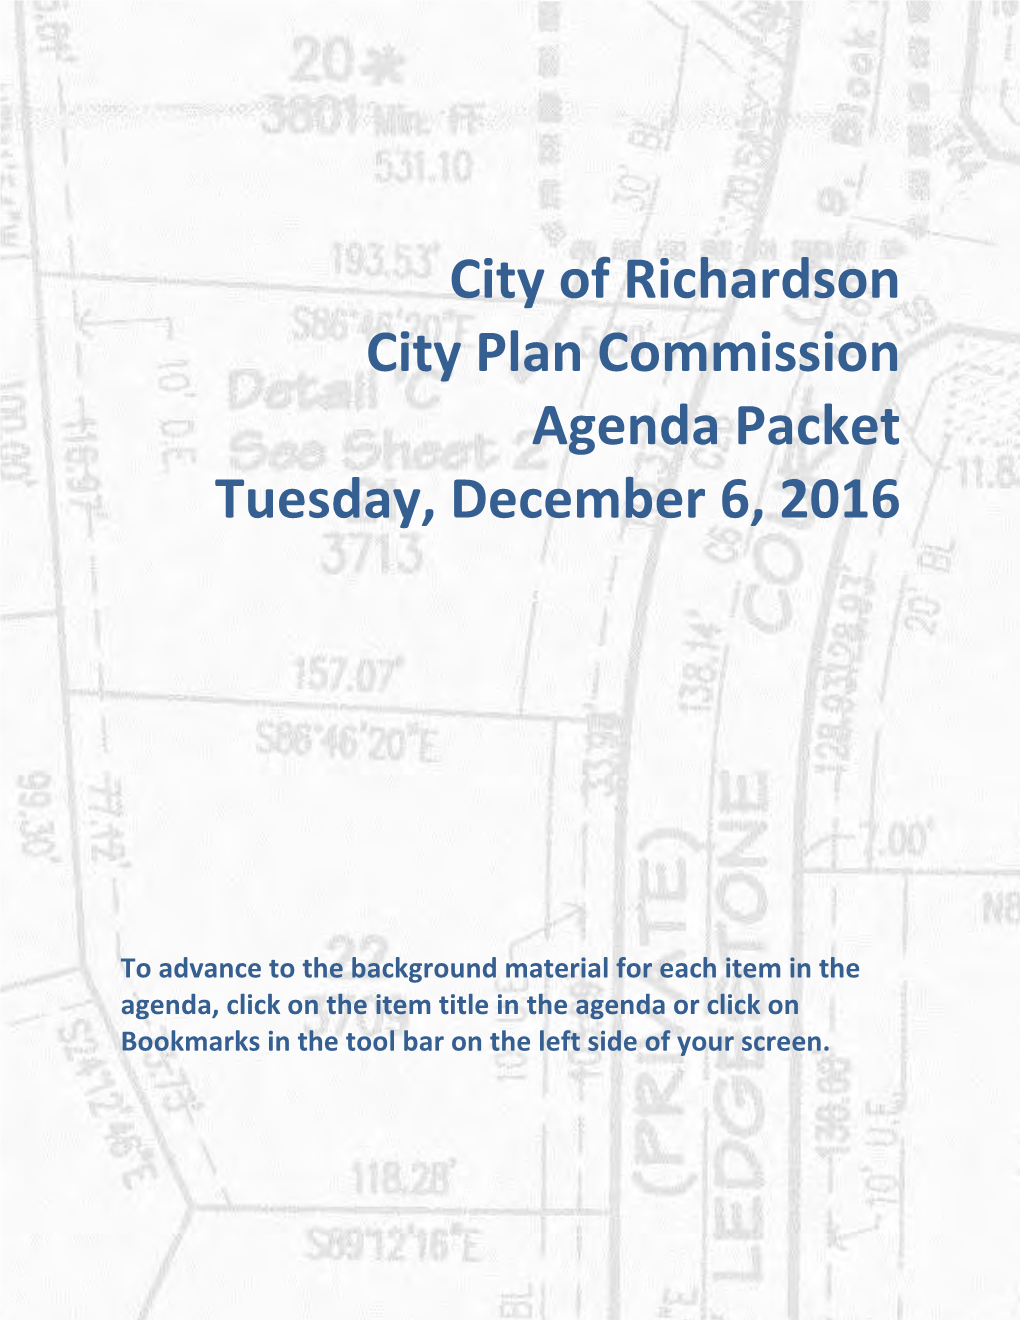 City Plan Commission Agenda Packet Tuesday, December 6, 2016